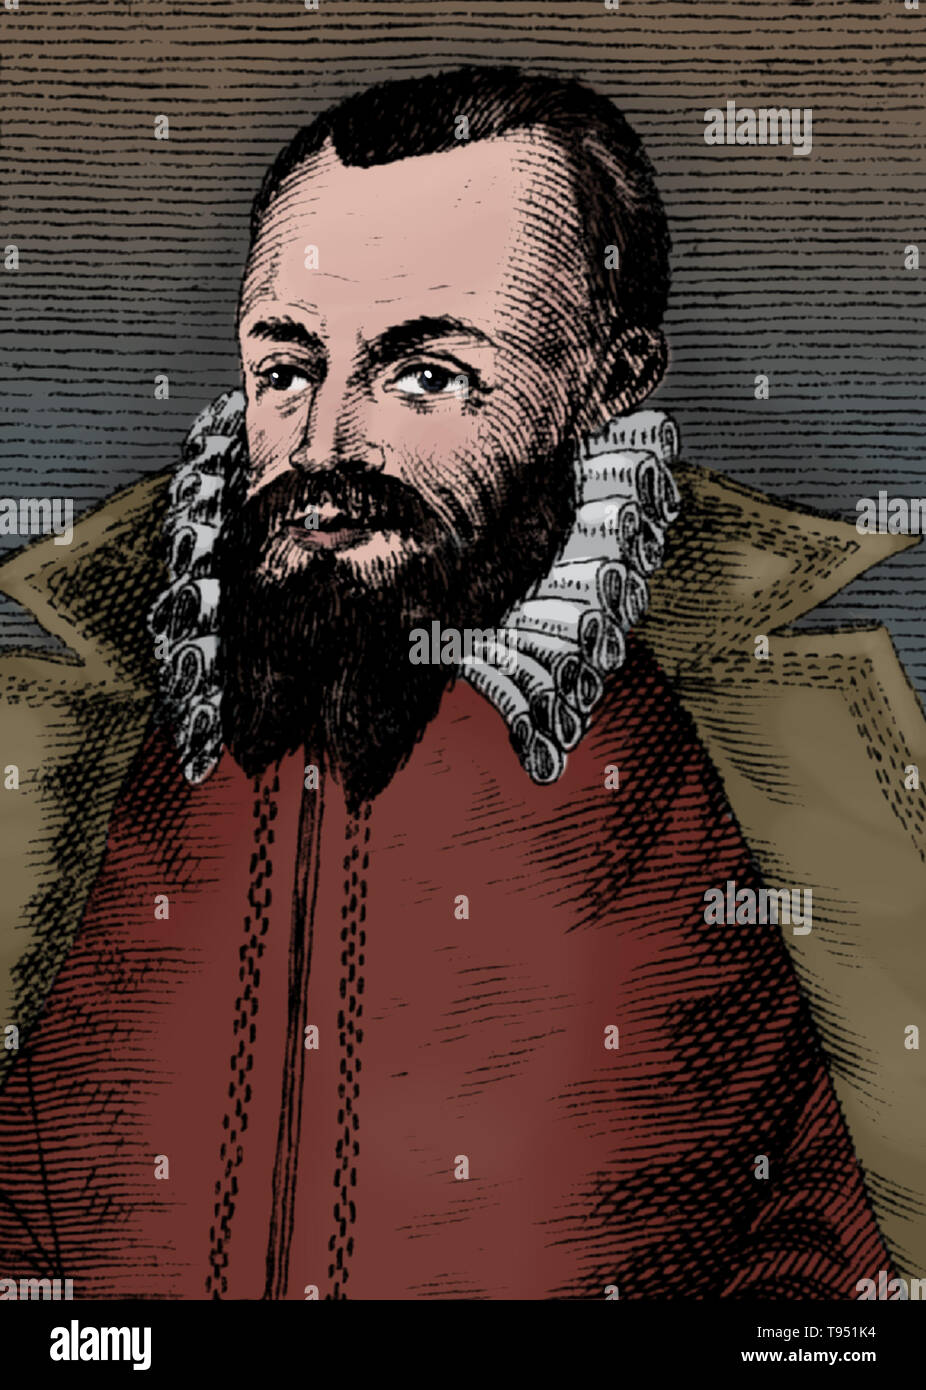 Michael Maestlin (September 30, 1550 - October 20, 1631) was a German astronomer and mathematician. He studied theology, mathematics, and astronomy/astrology and graduated as Magister in 1571. In 1576 he became a Lutheran deacon. In 1580 he became a Professor of mathematics, first at the University of Heidelberg, then at the University of Tubingen were he taught for 47 years. Among his students was Johannes Kepler. Stock Photo